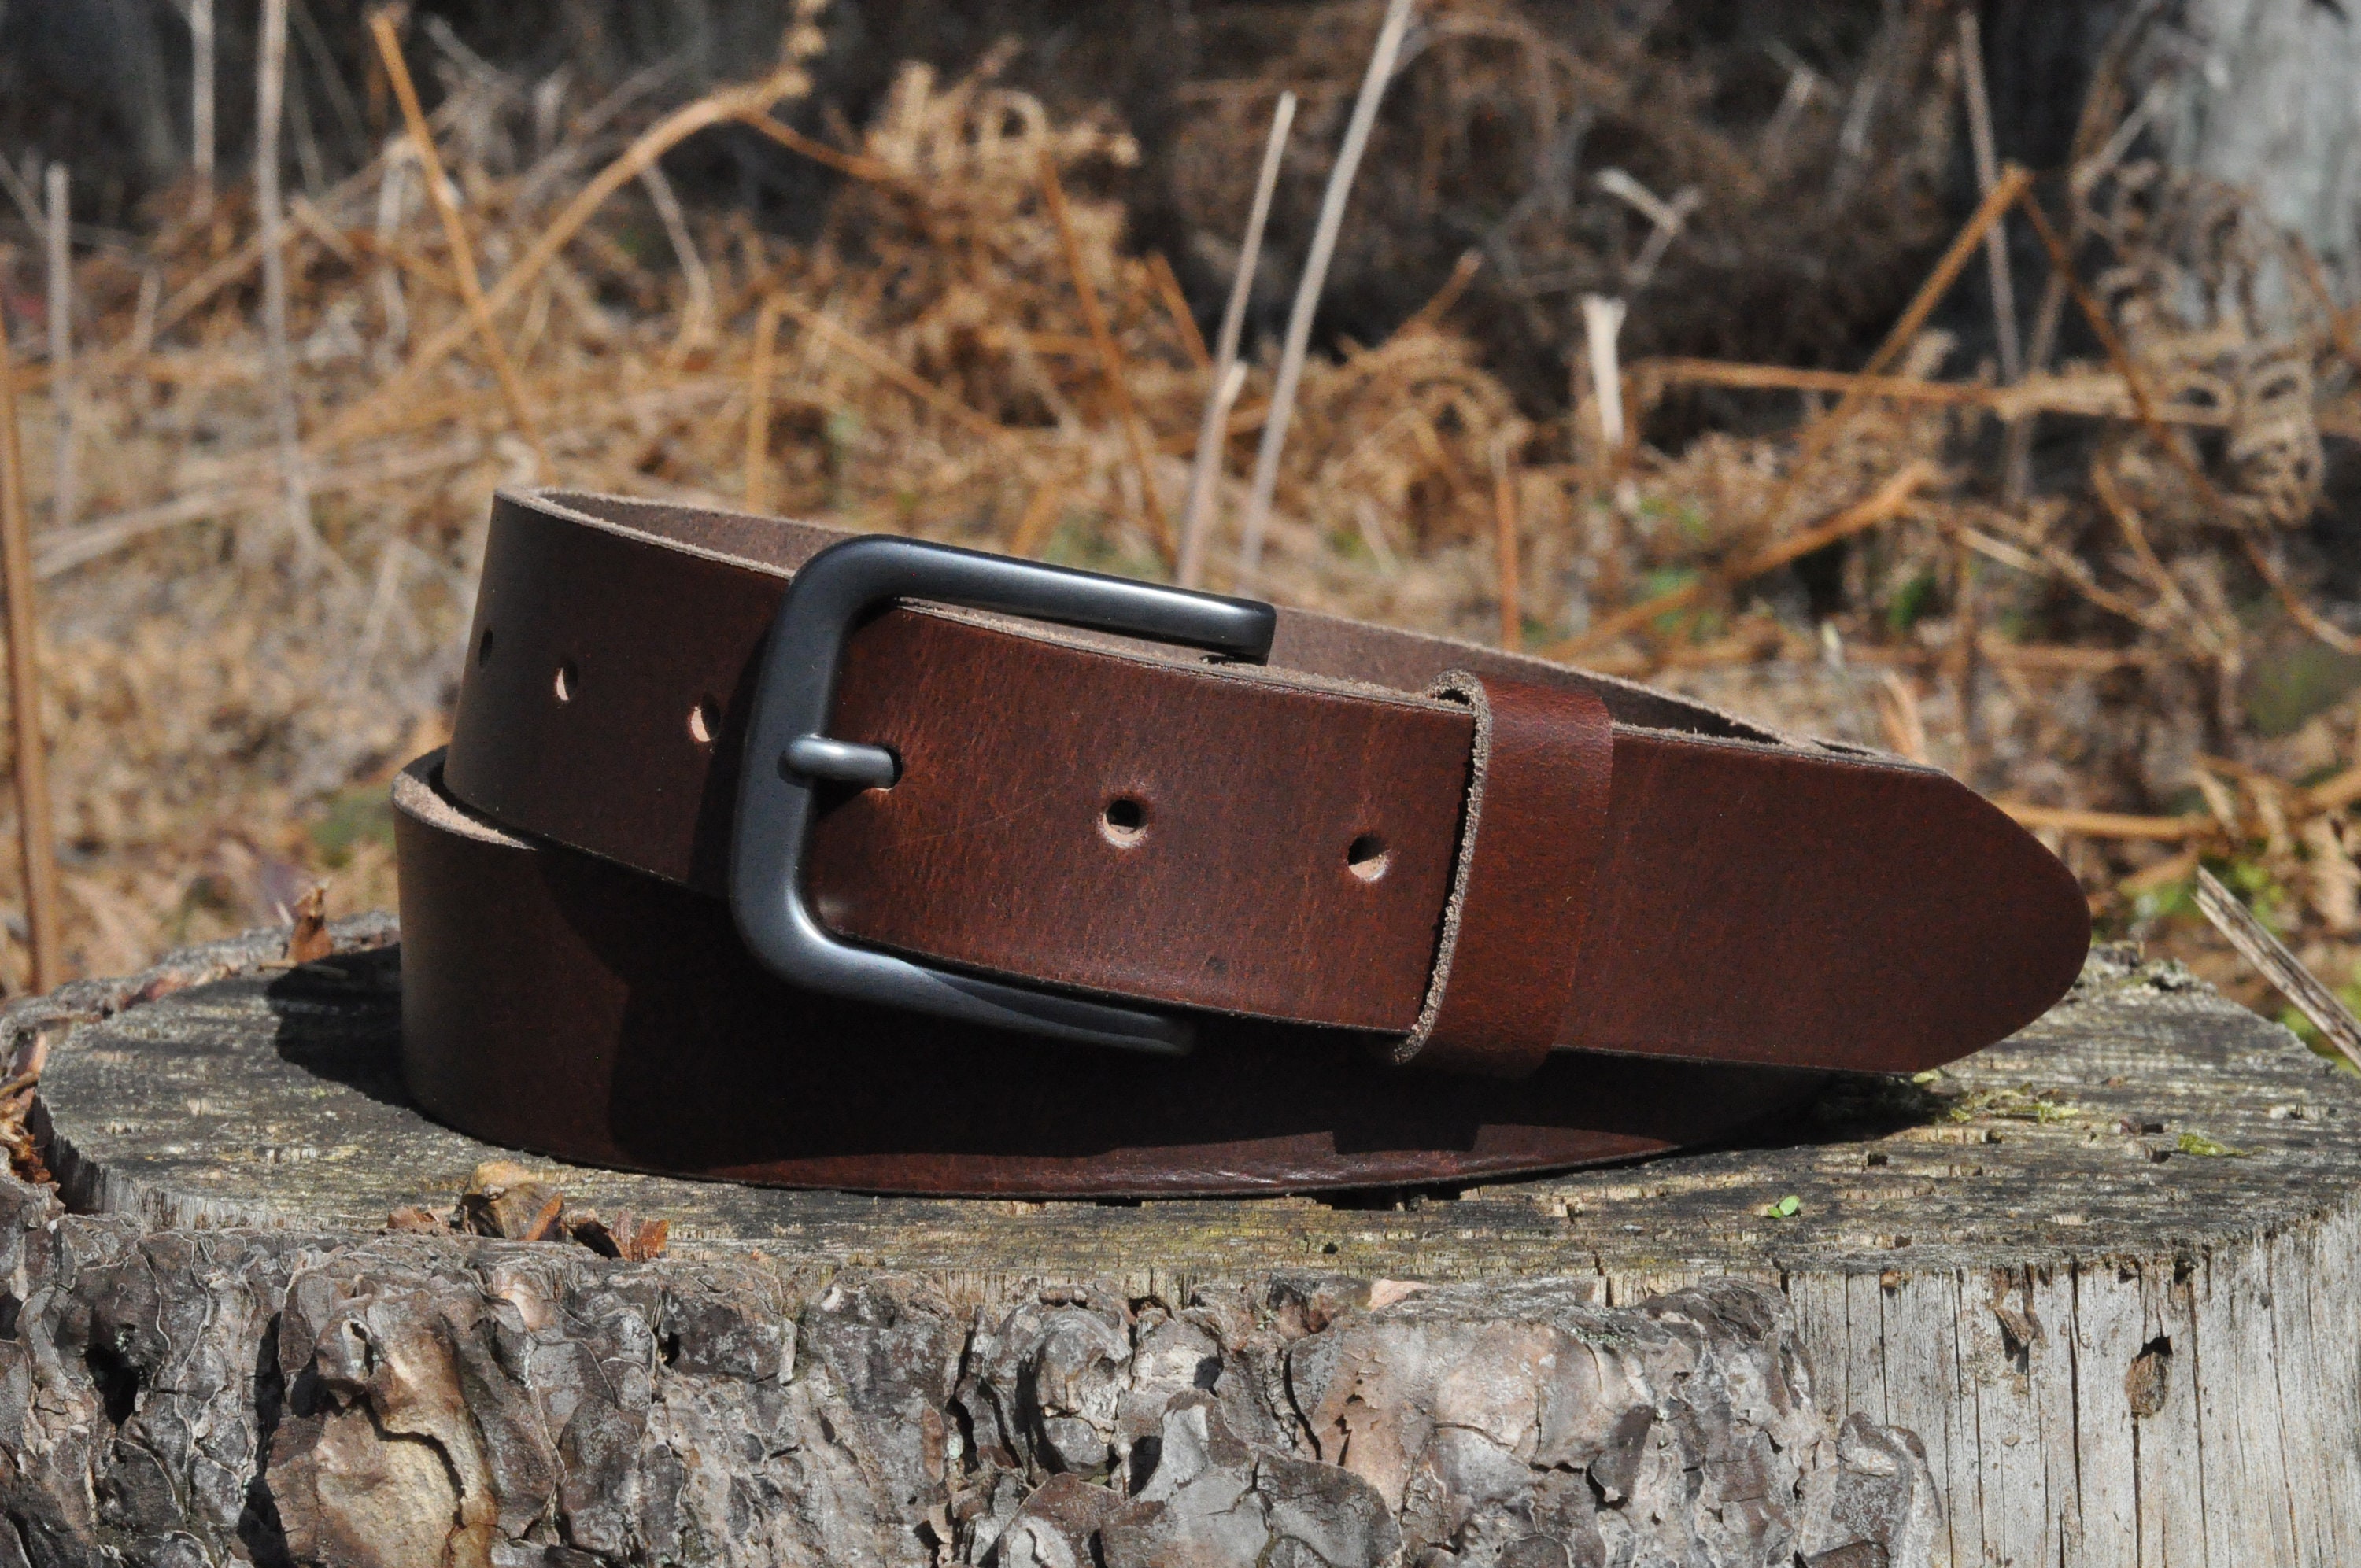 Thick Mens Leather Belt  Handmade Leather Belts For Men – Rustico